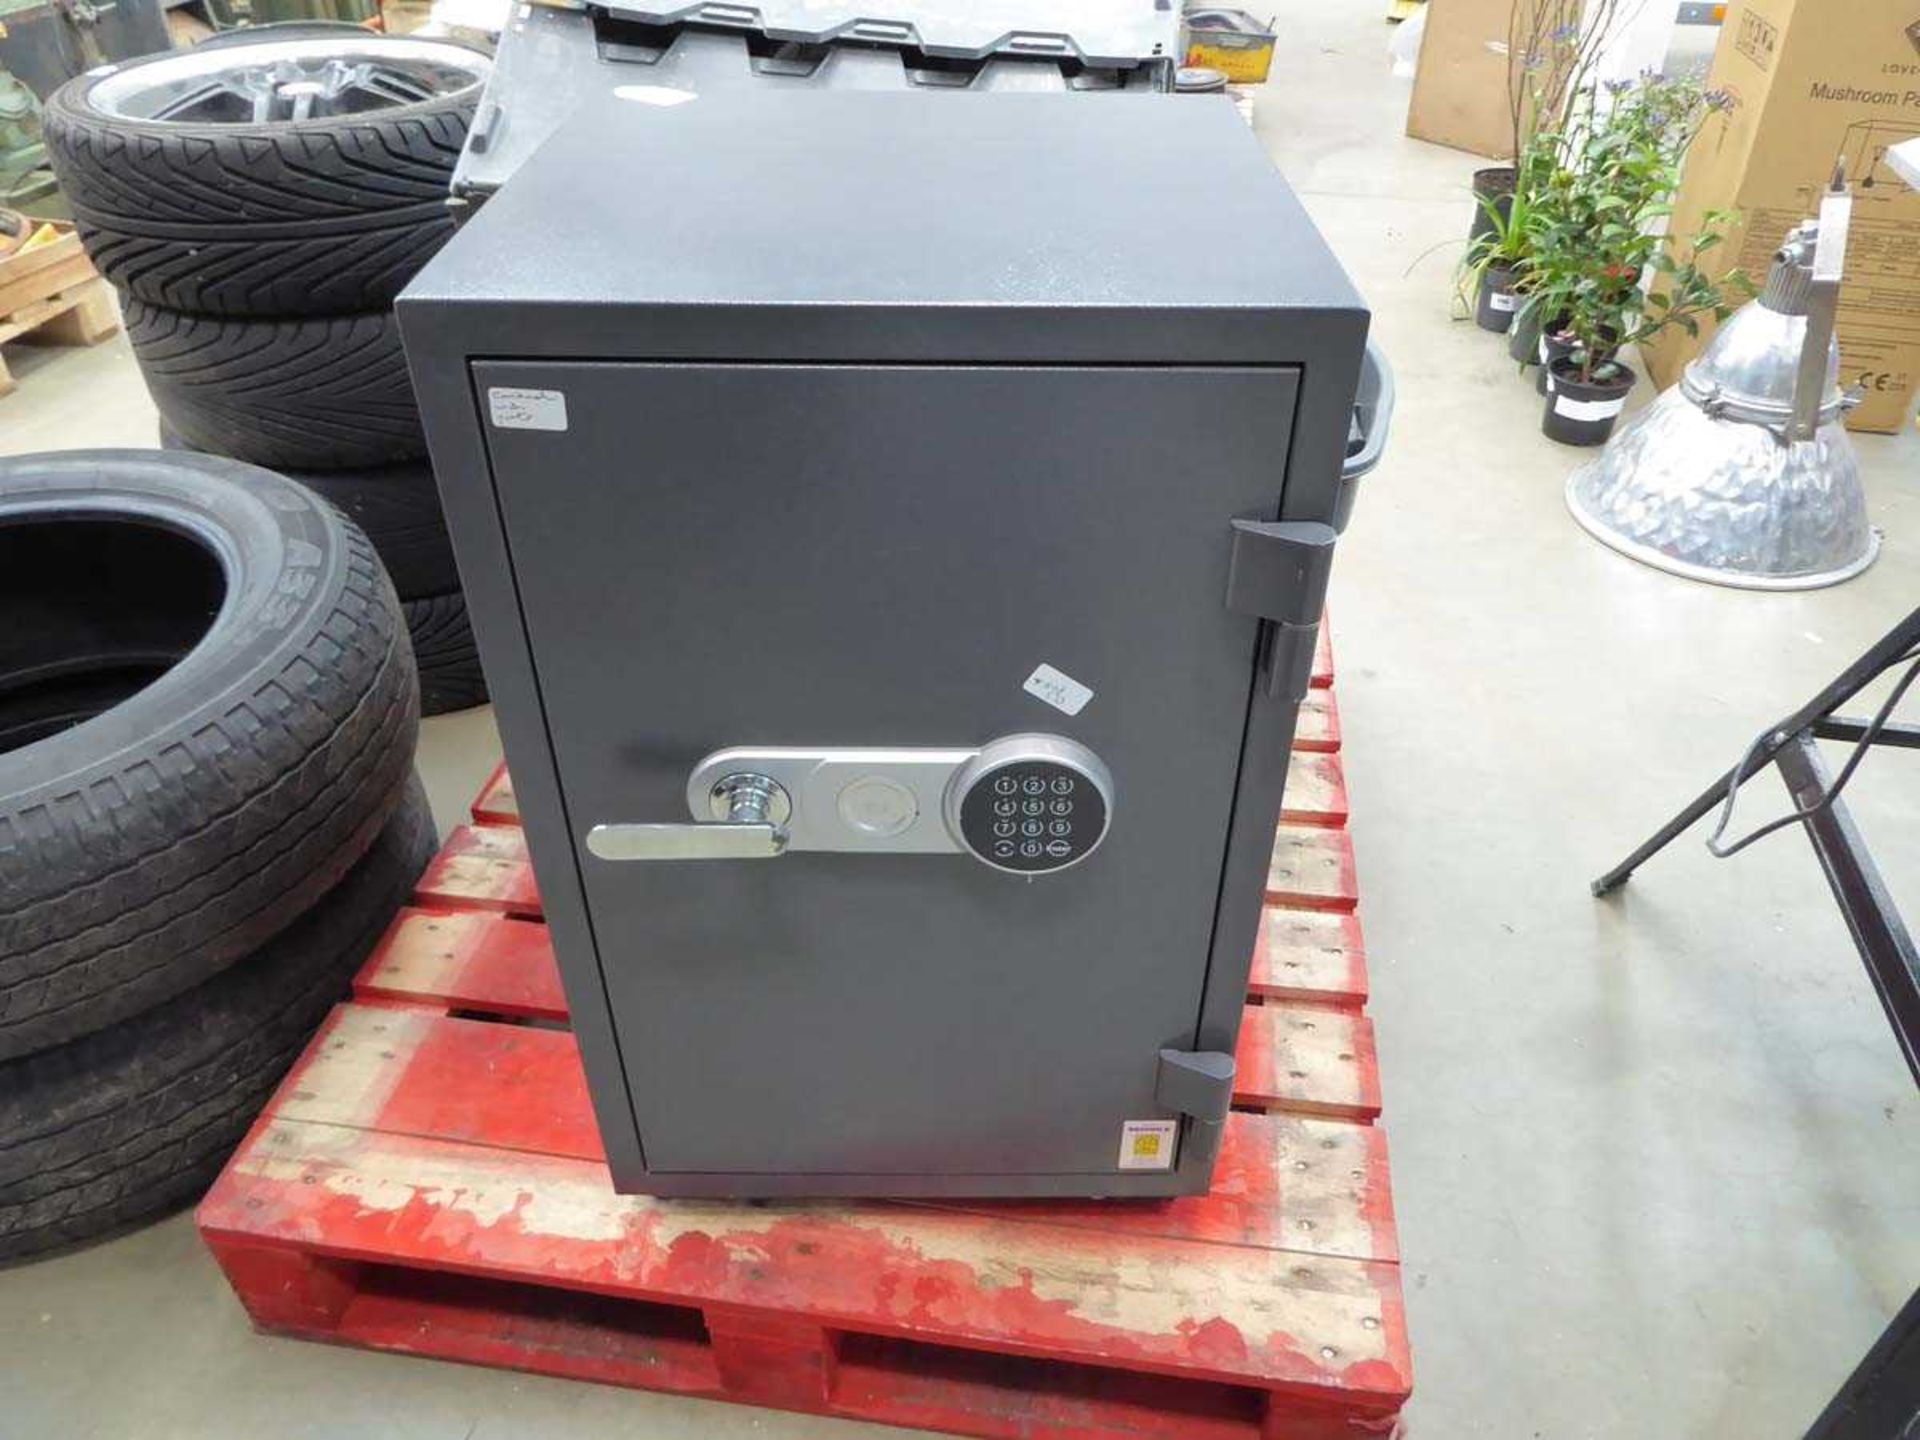 Brinnick fire proof safe with combination